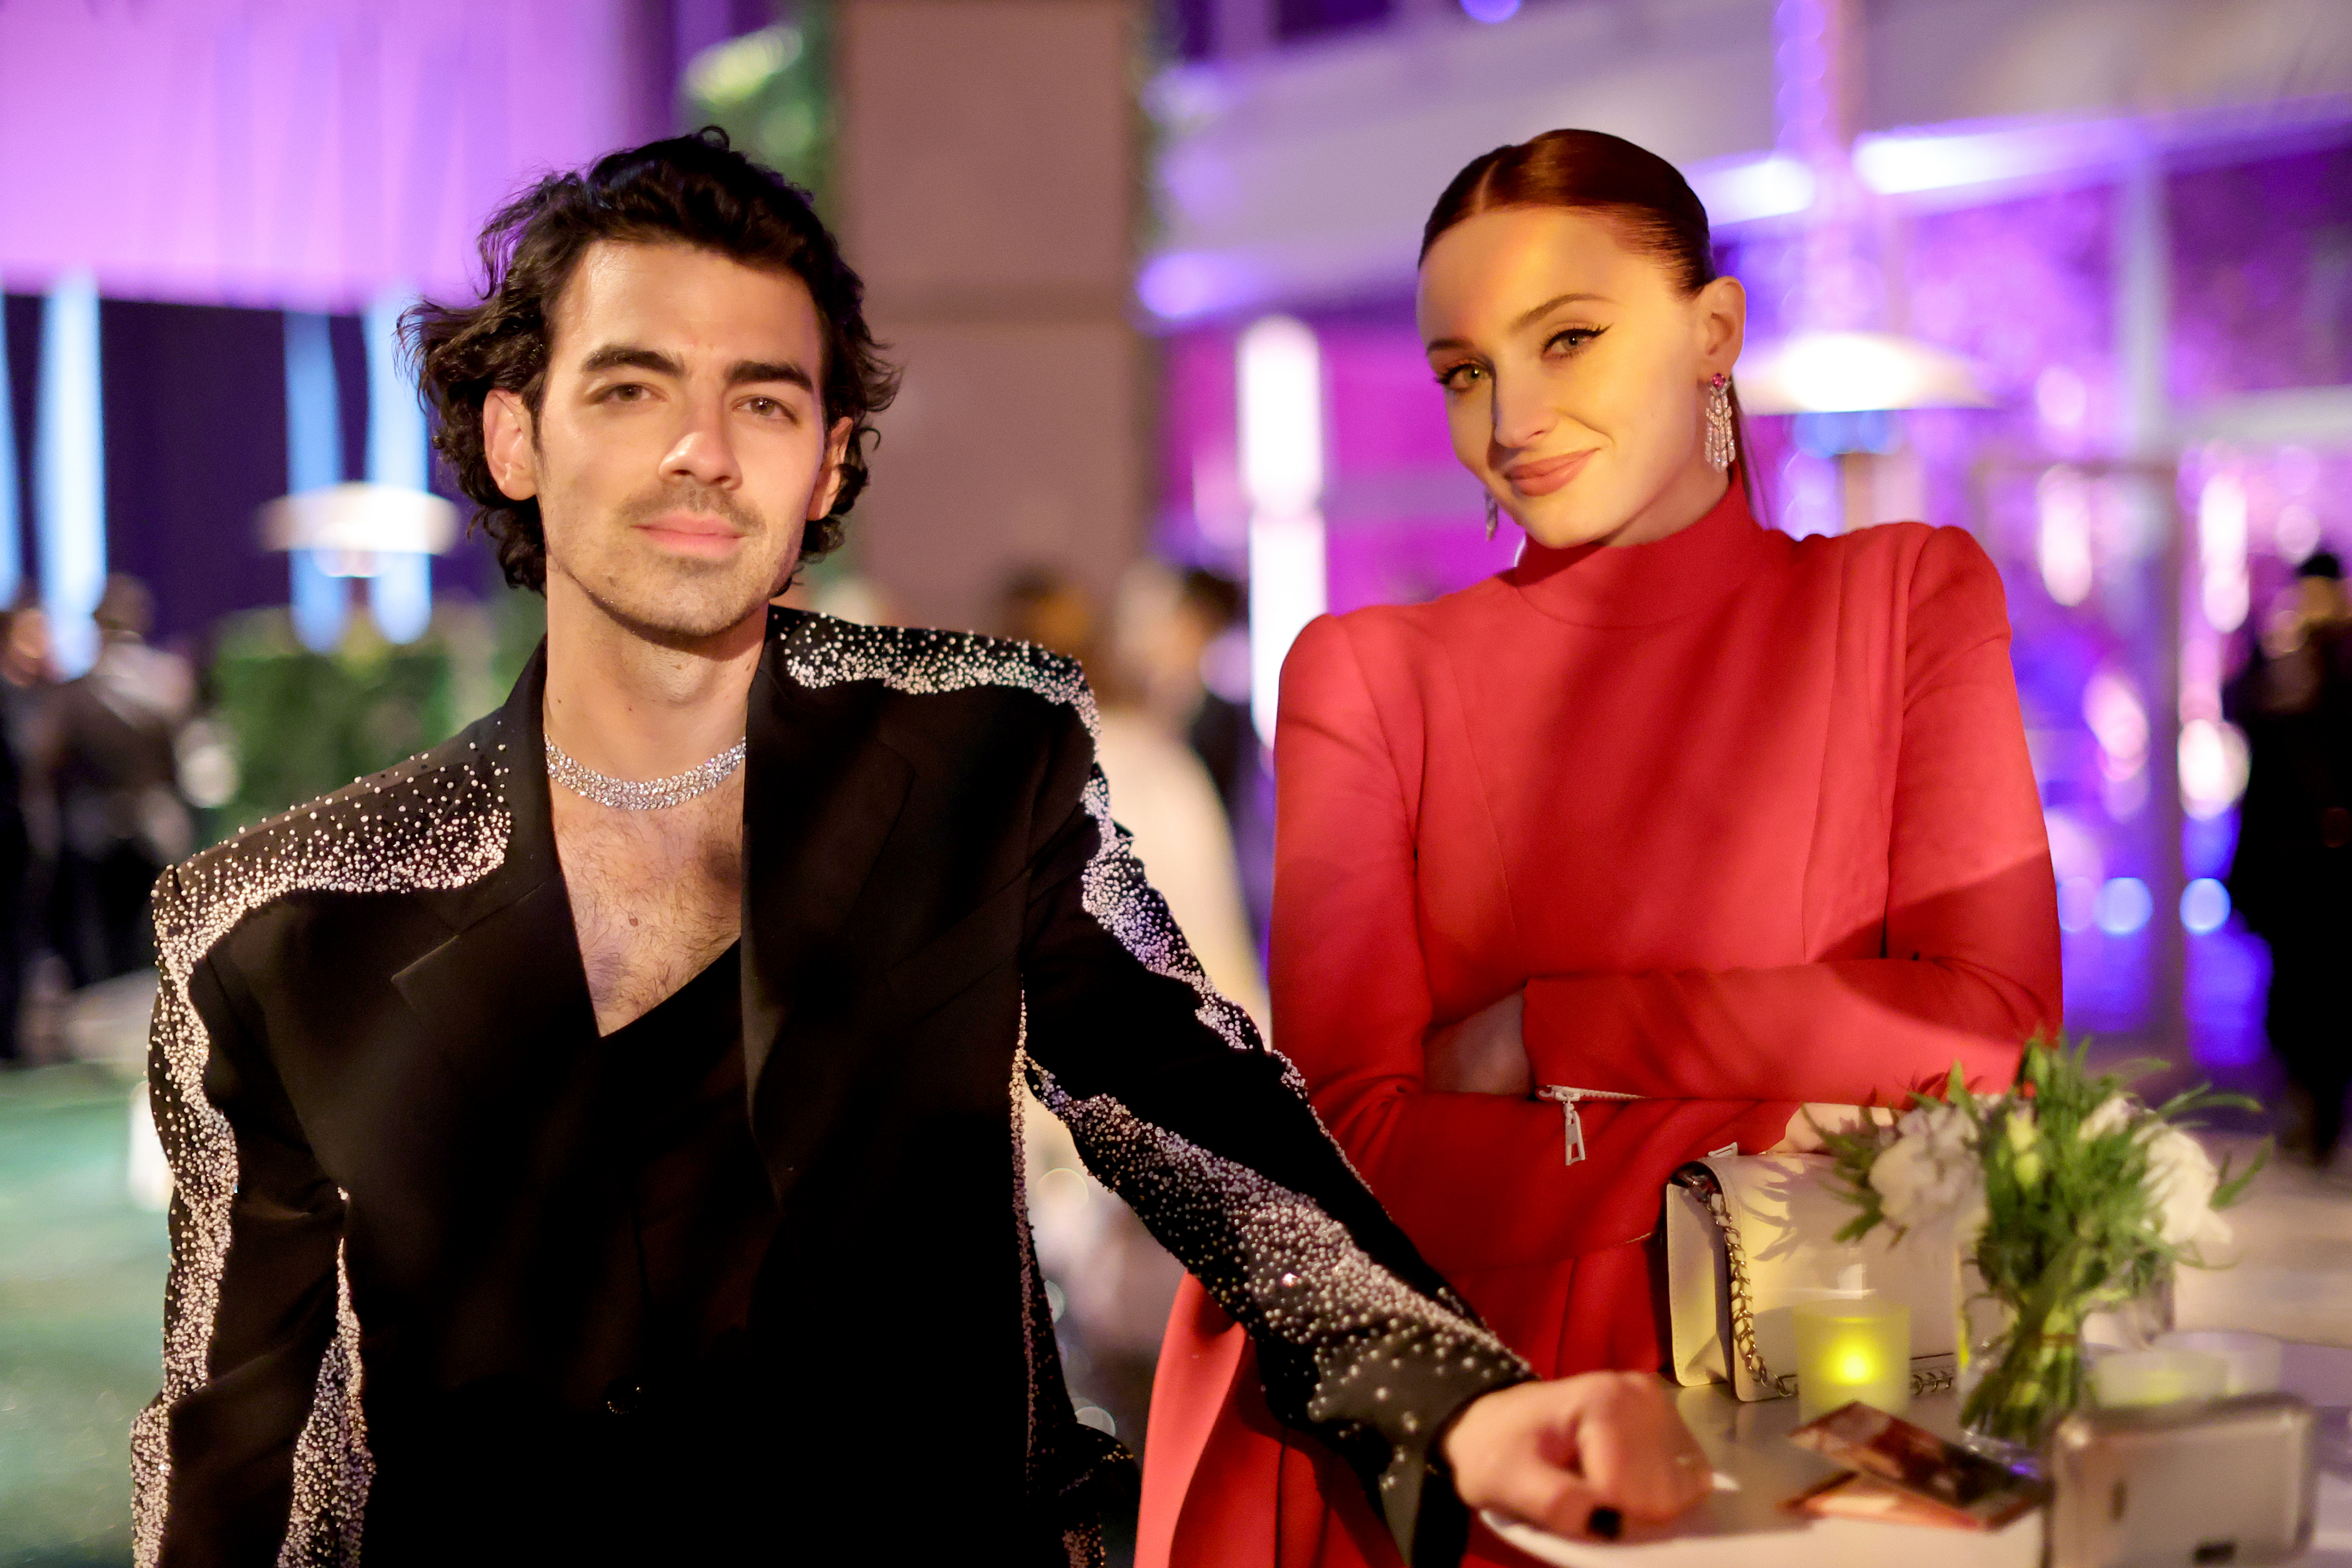 Joe Jonas and Sophie Turner seated at an event